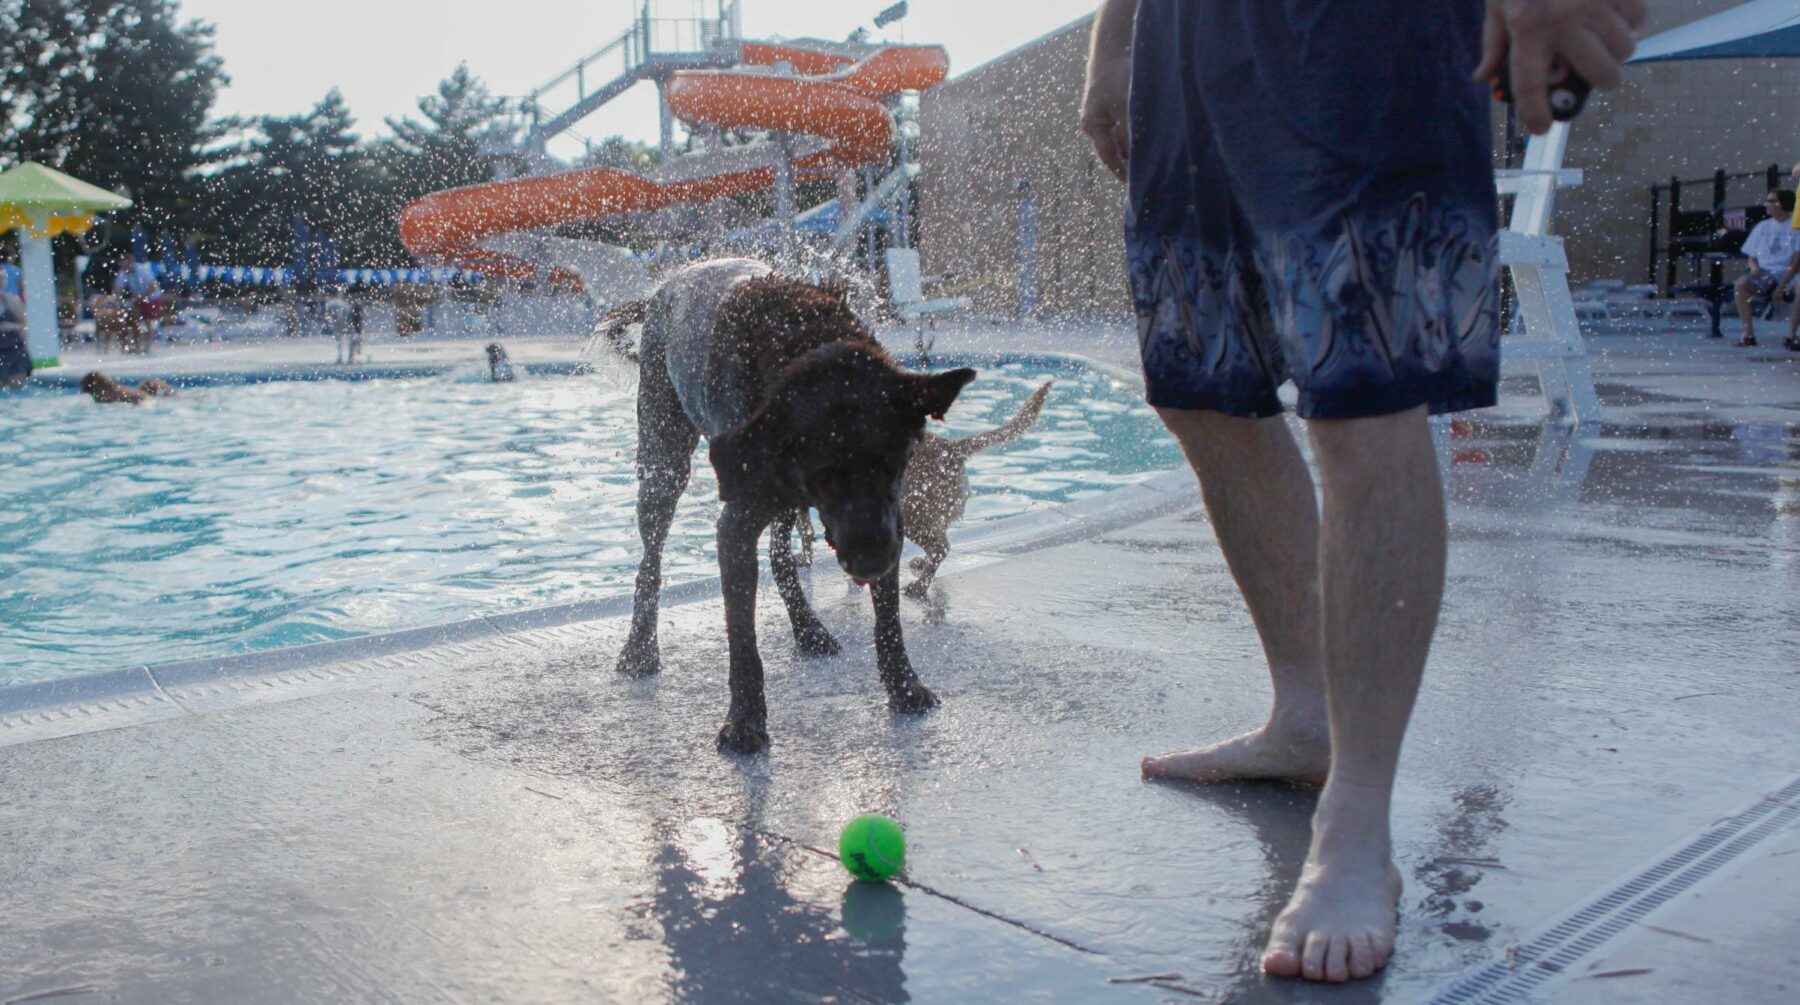 Dog with tennis ball and human near swimming pool